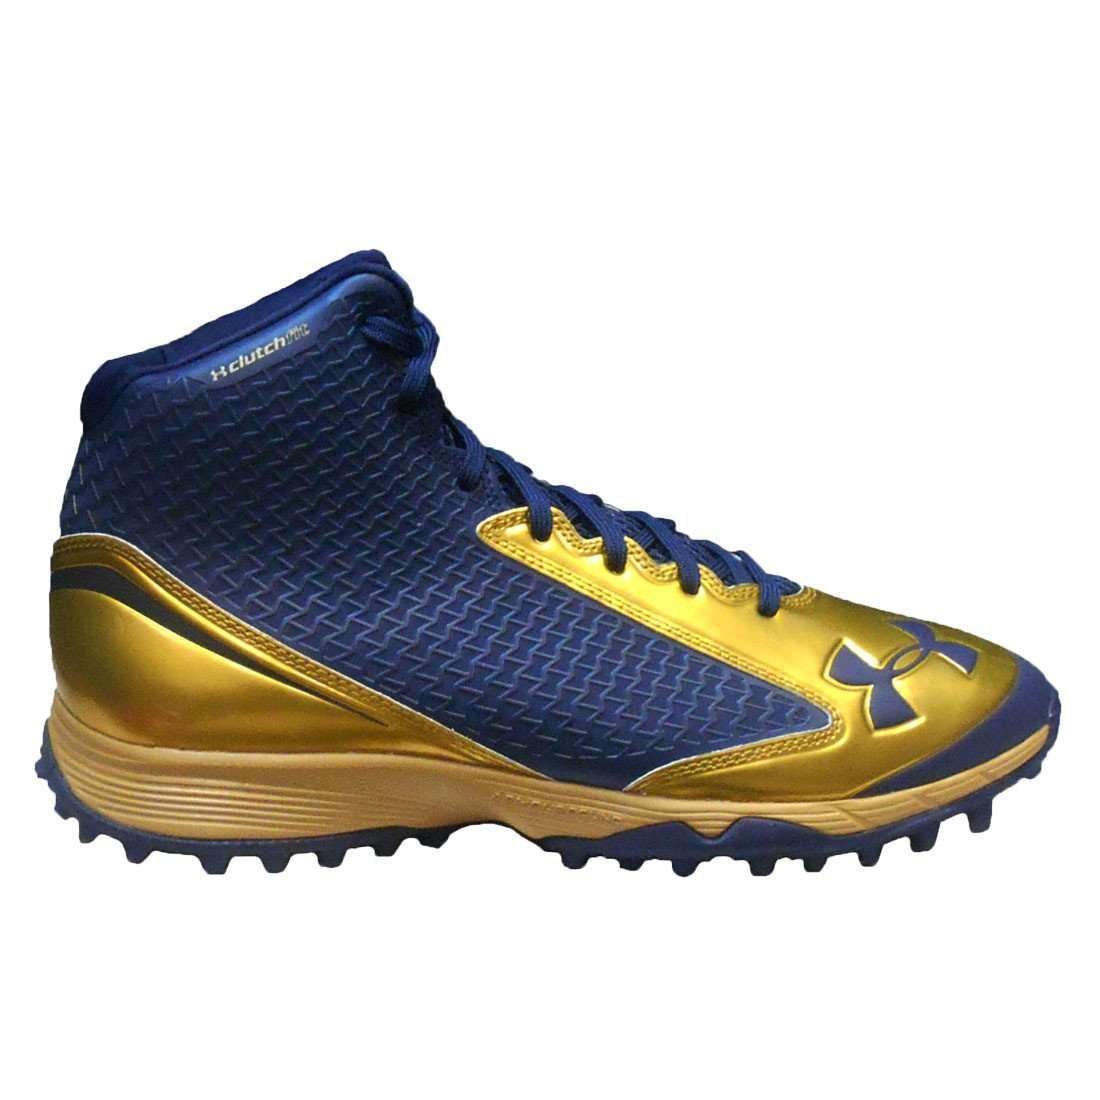 youth football turf shoes